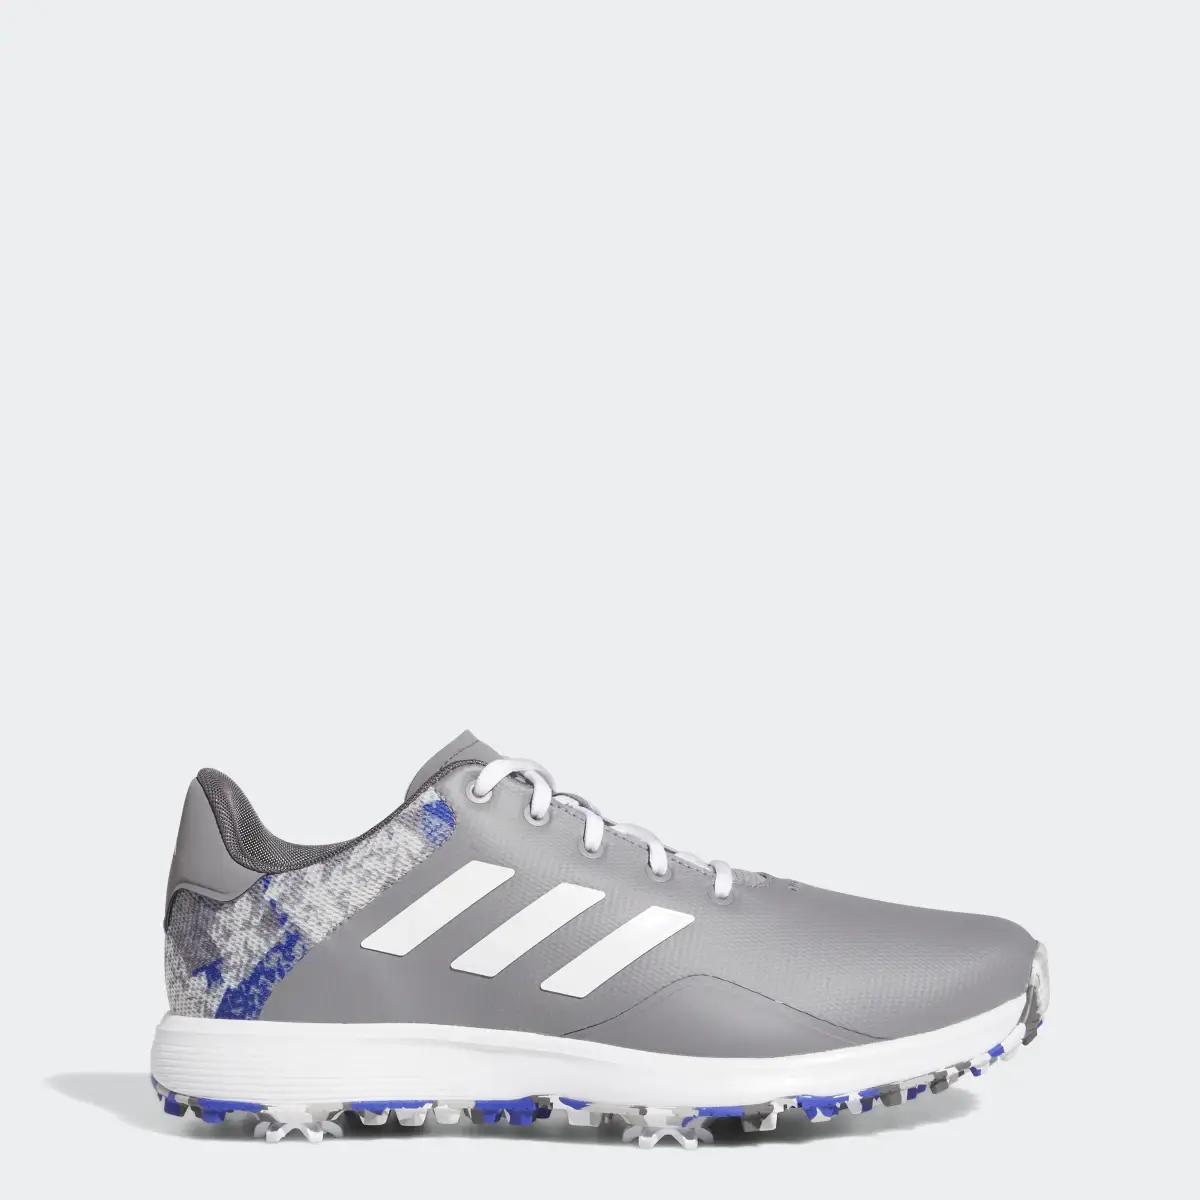 Adidas S2G Golf Shoes. 1